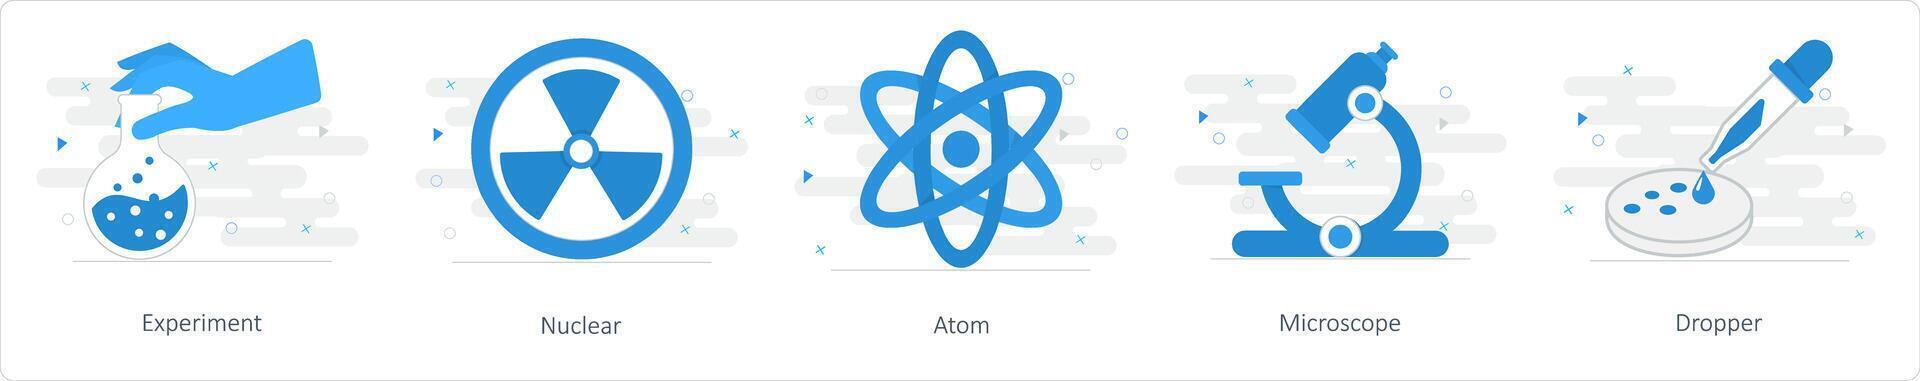 A set of 5 Mix icons as experiment, nuclear, atom vector